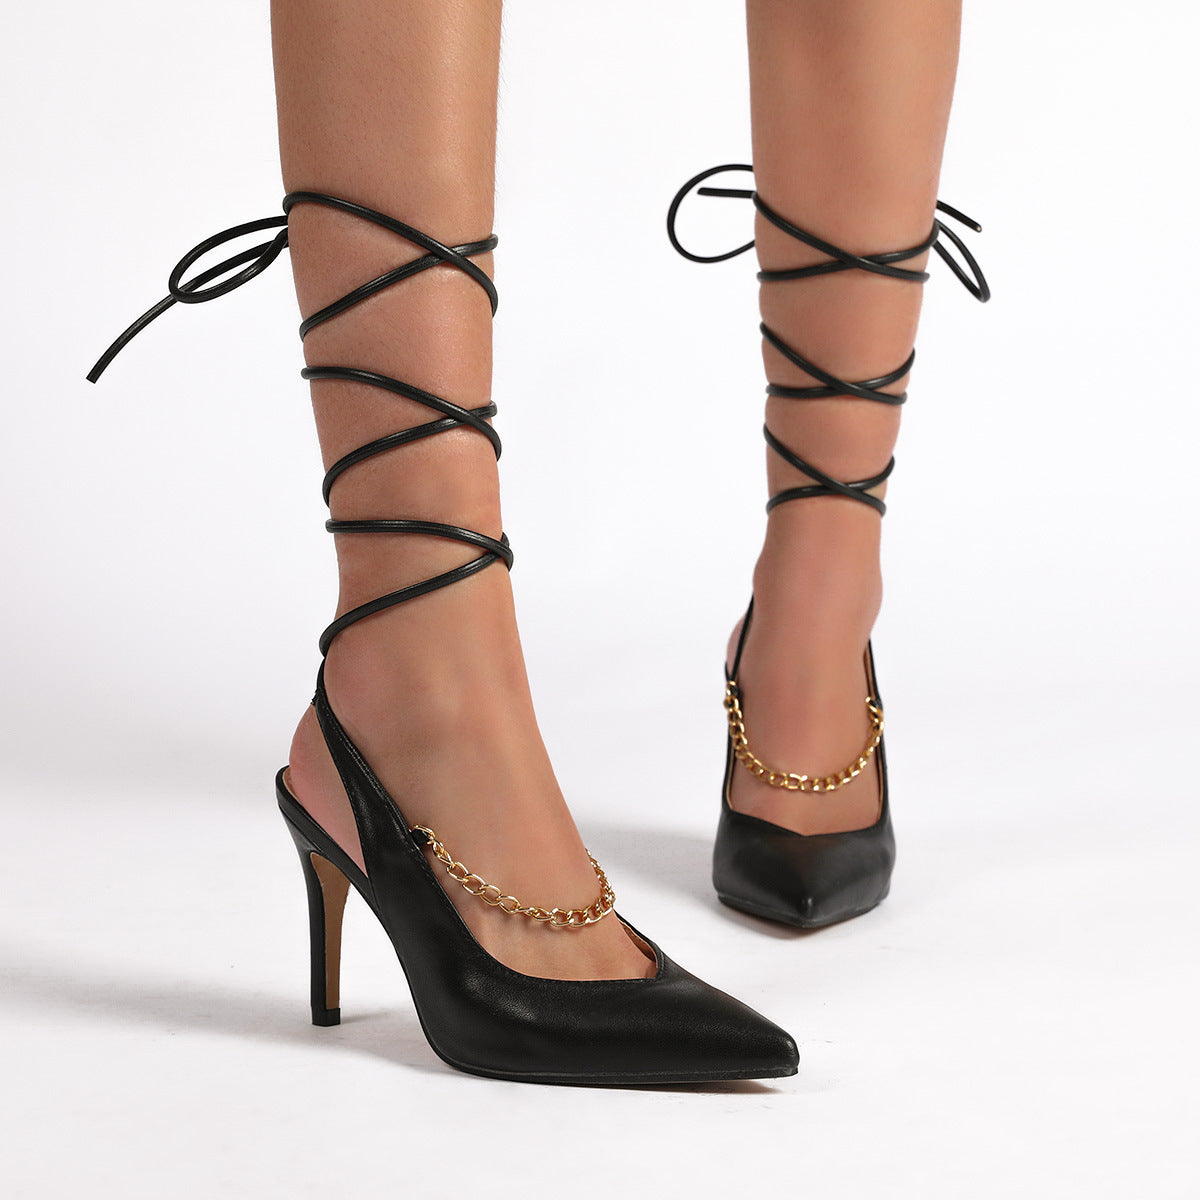 Women's pointed toe ankle tie-up heels Sexy summer party lace-up heels